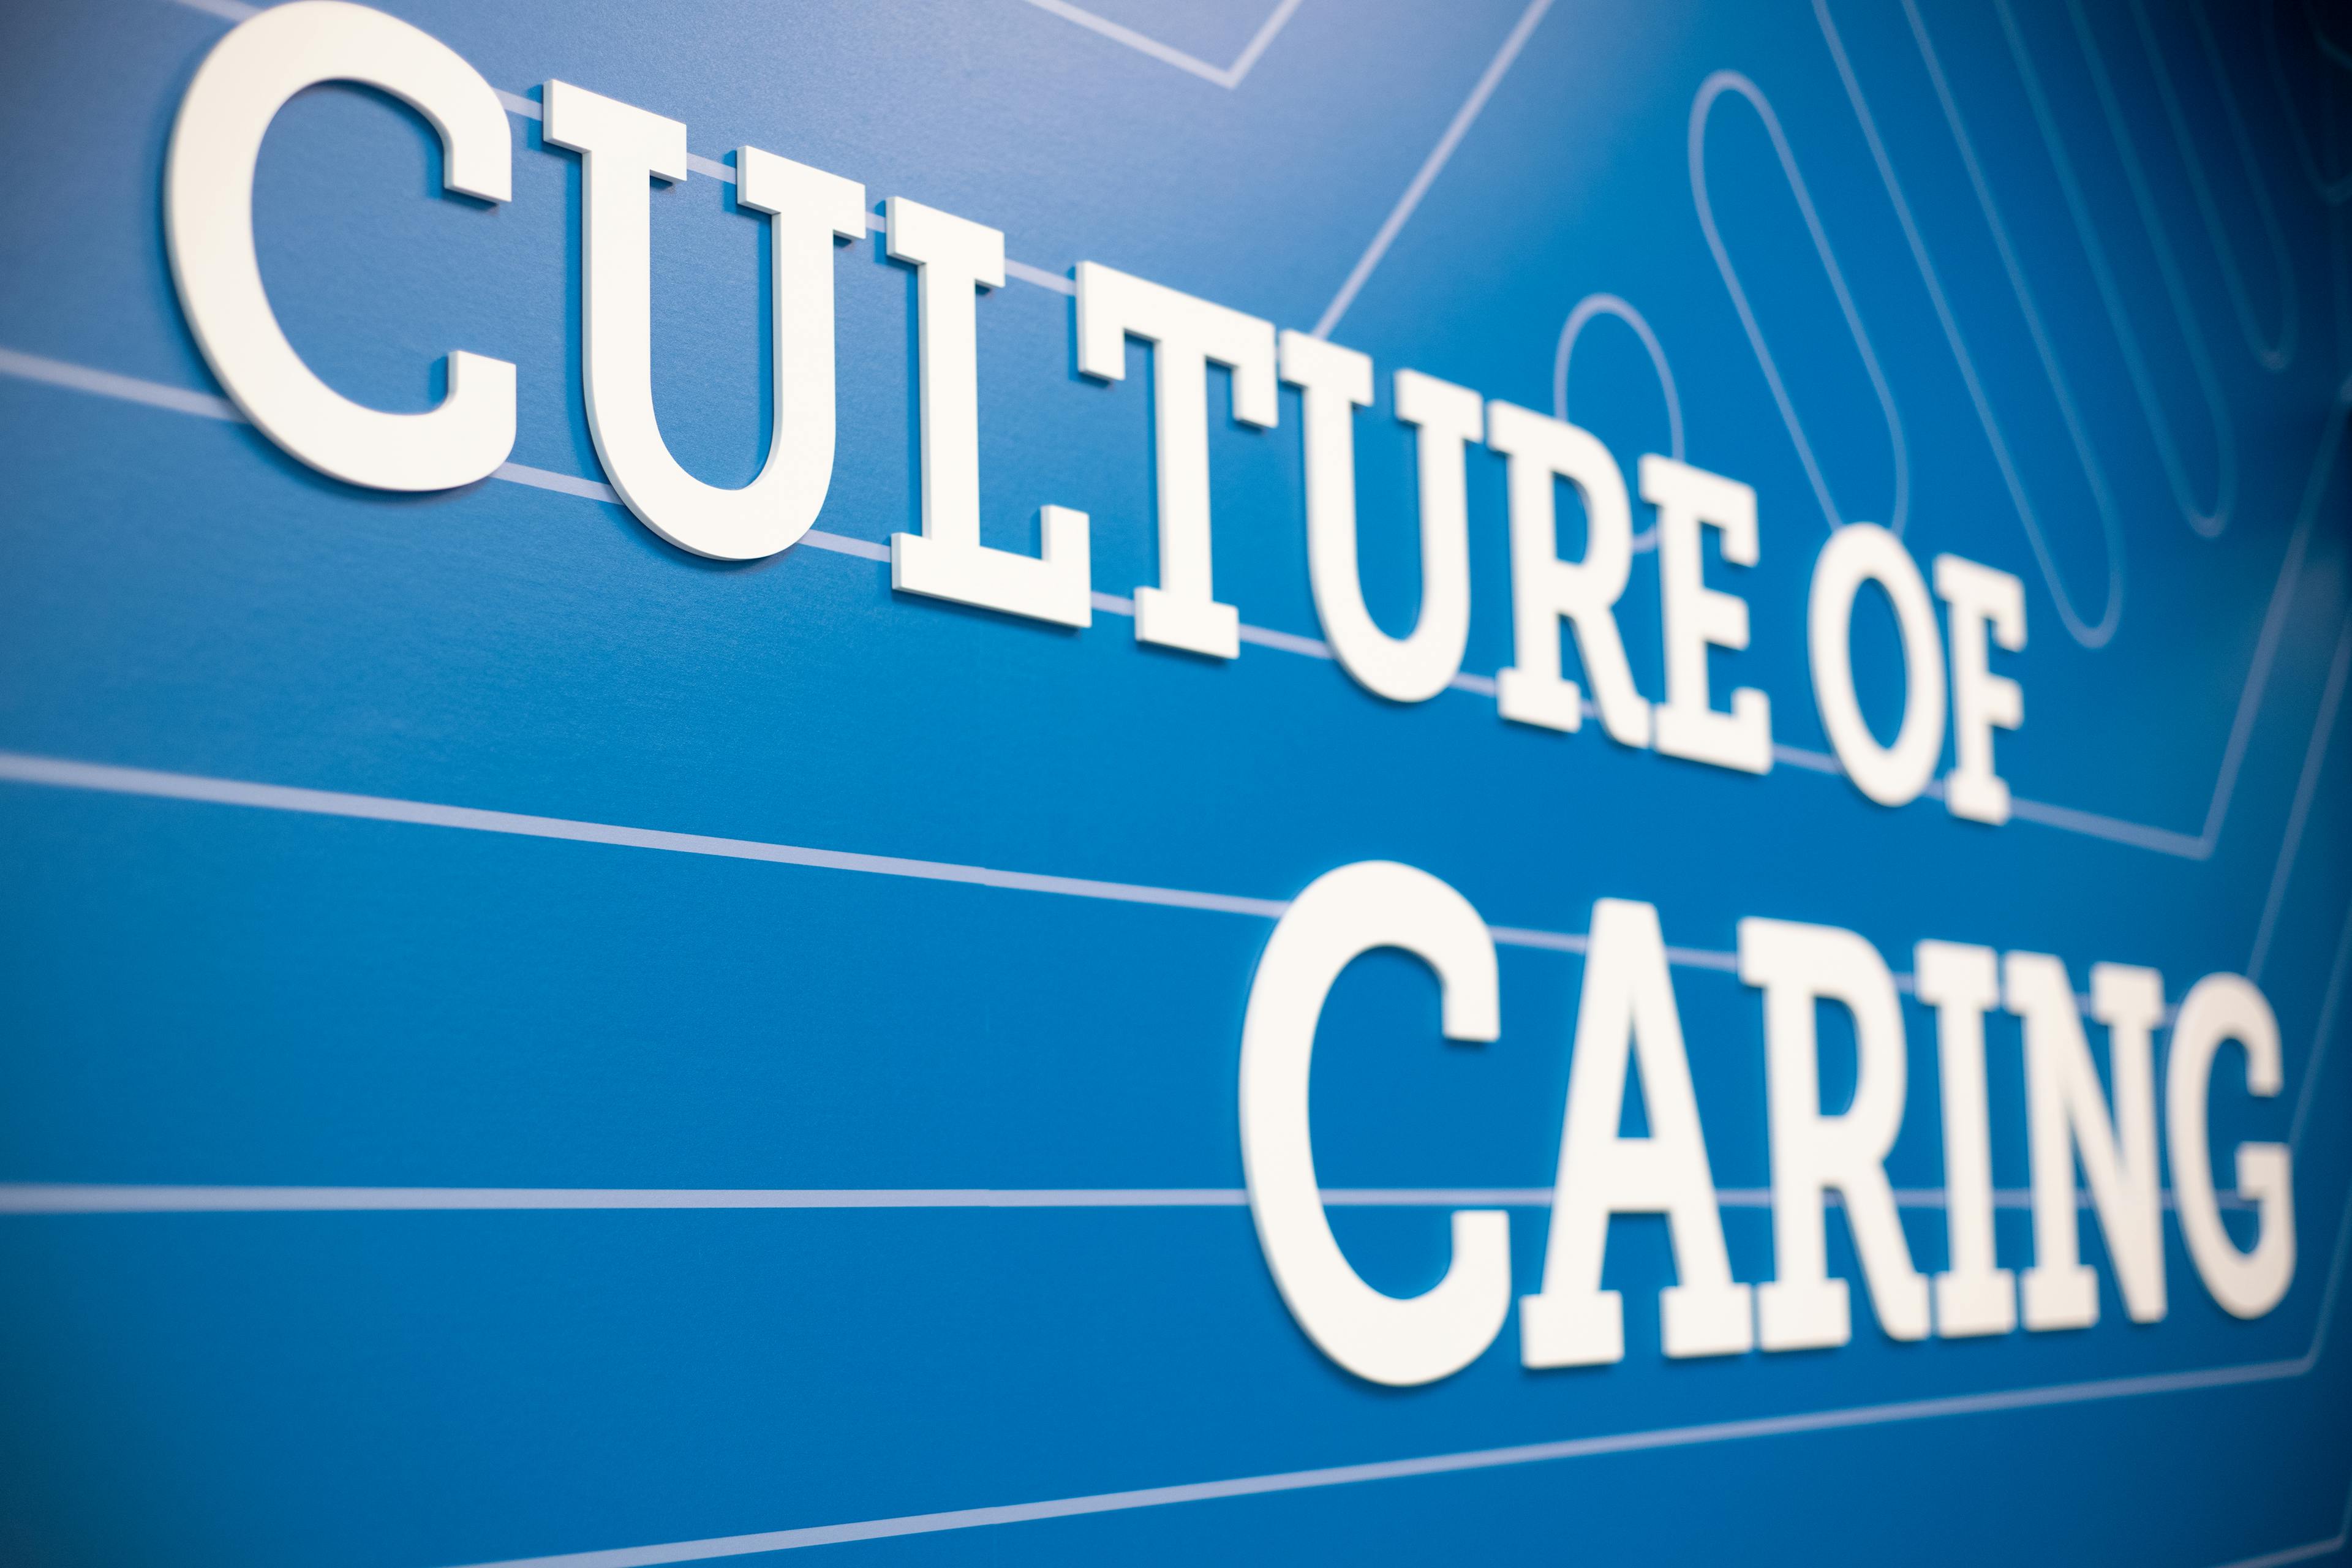 Culture of caring